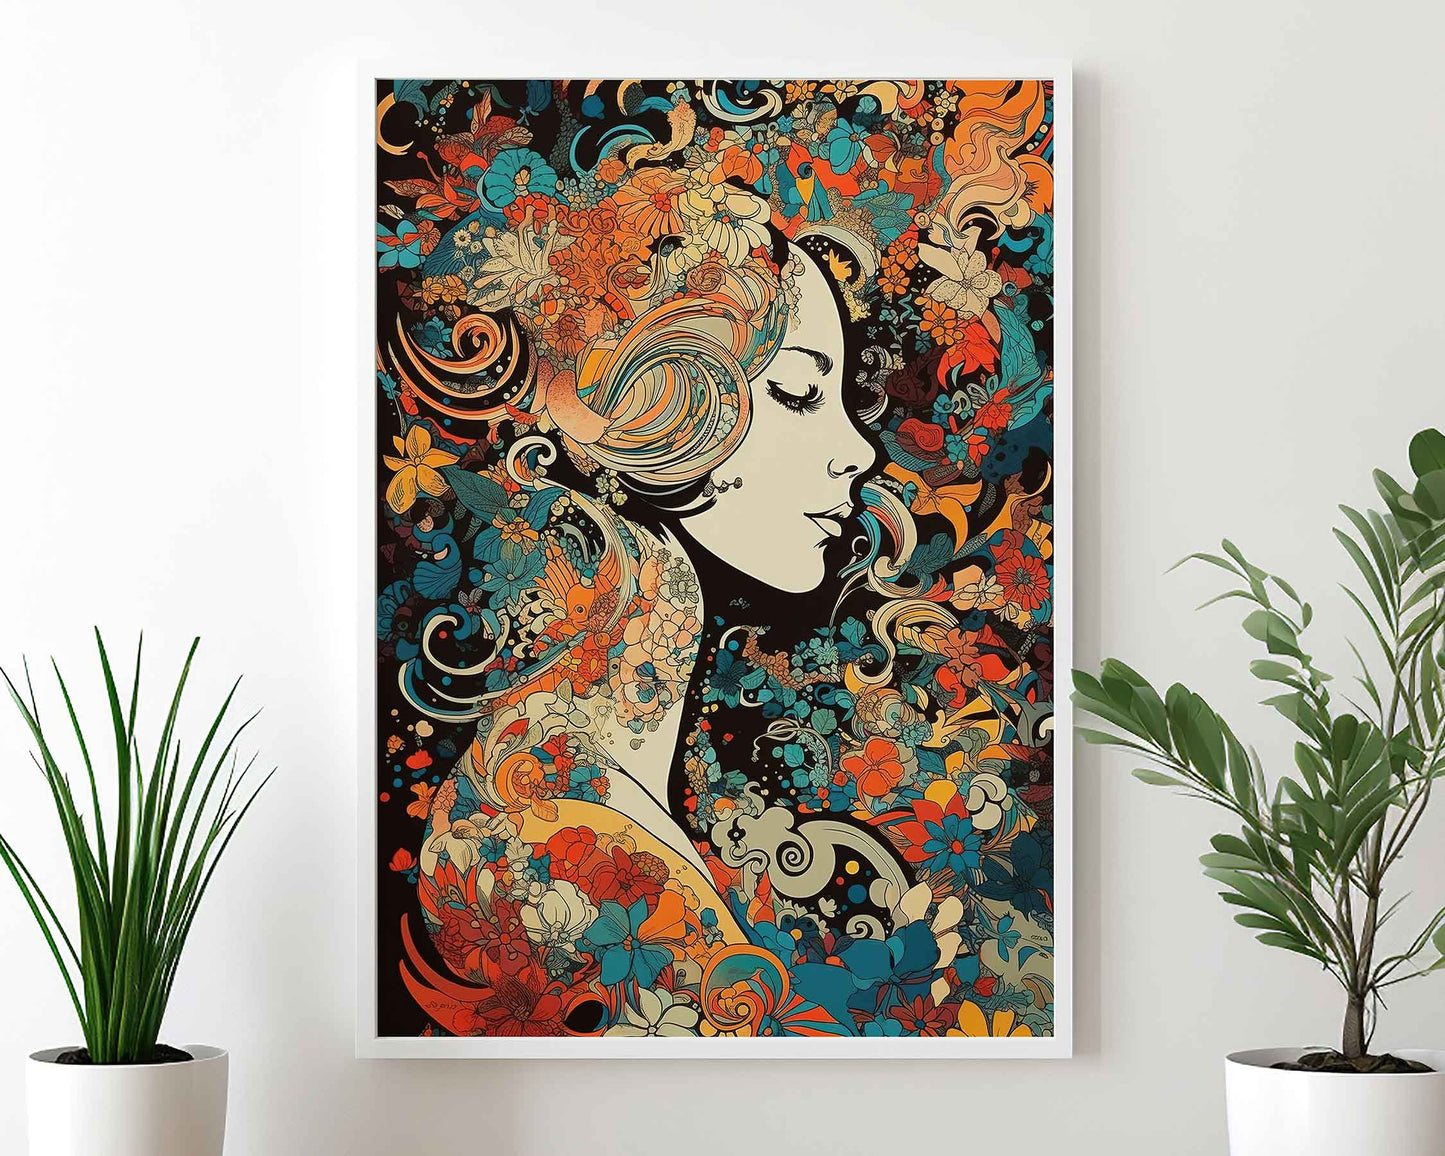 Framed Image of Vintage Art Nouveau Parisian 70s Psychedelic Wall Art Poster Print